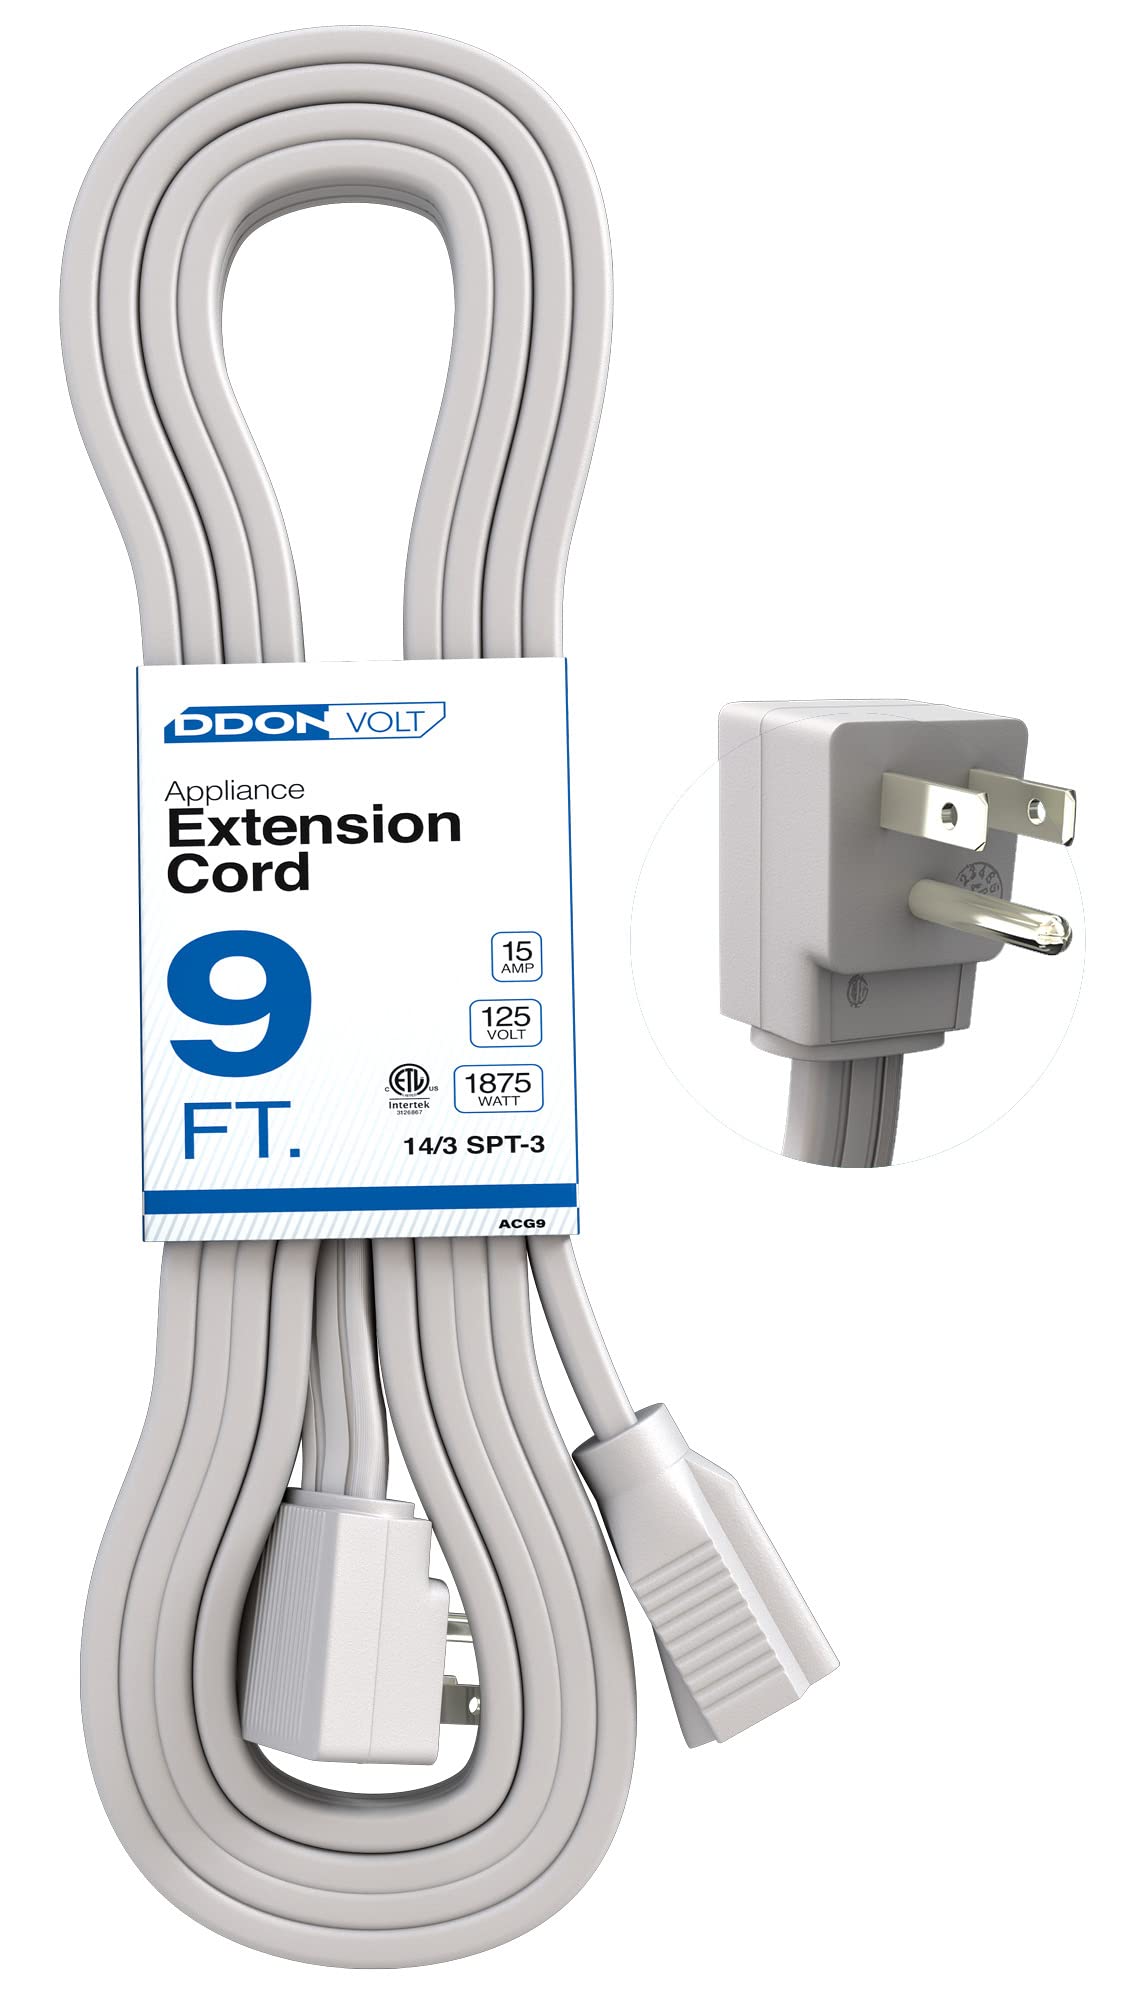 ddon usa Appliance Extension cord - 9ft Heavy Duty gray Extension Wire for Air conditioner, Refrigerator,  All Major Appliances - 14 gaug